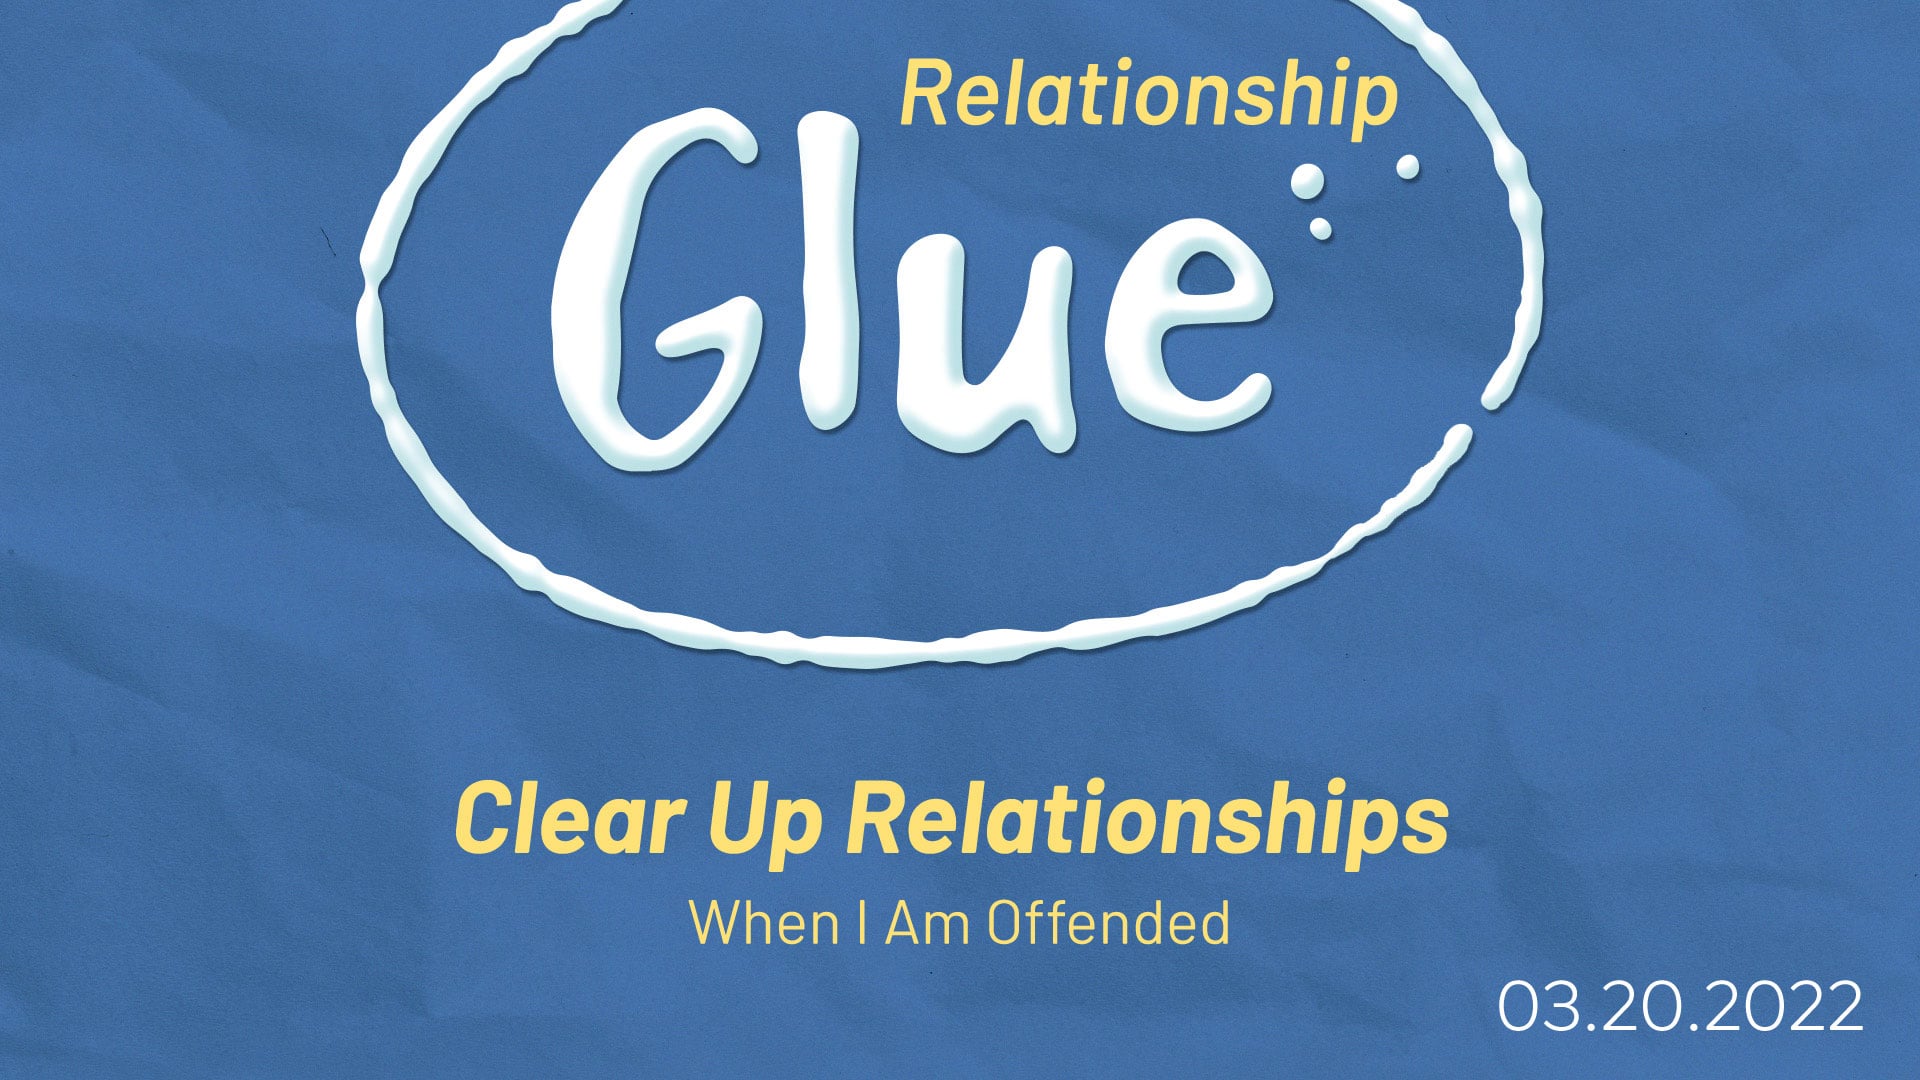 Relationship Glue - Part 7: Clear Up Relationships (When I Am Offended)